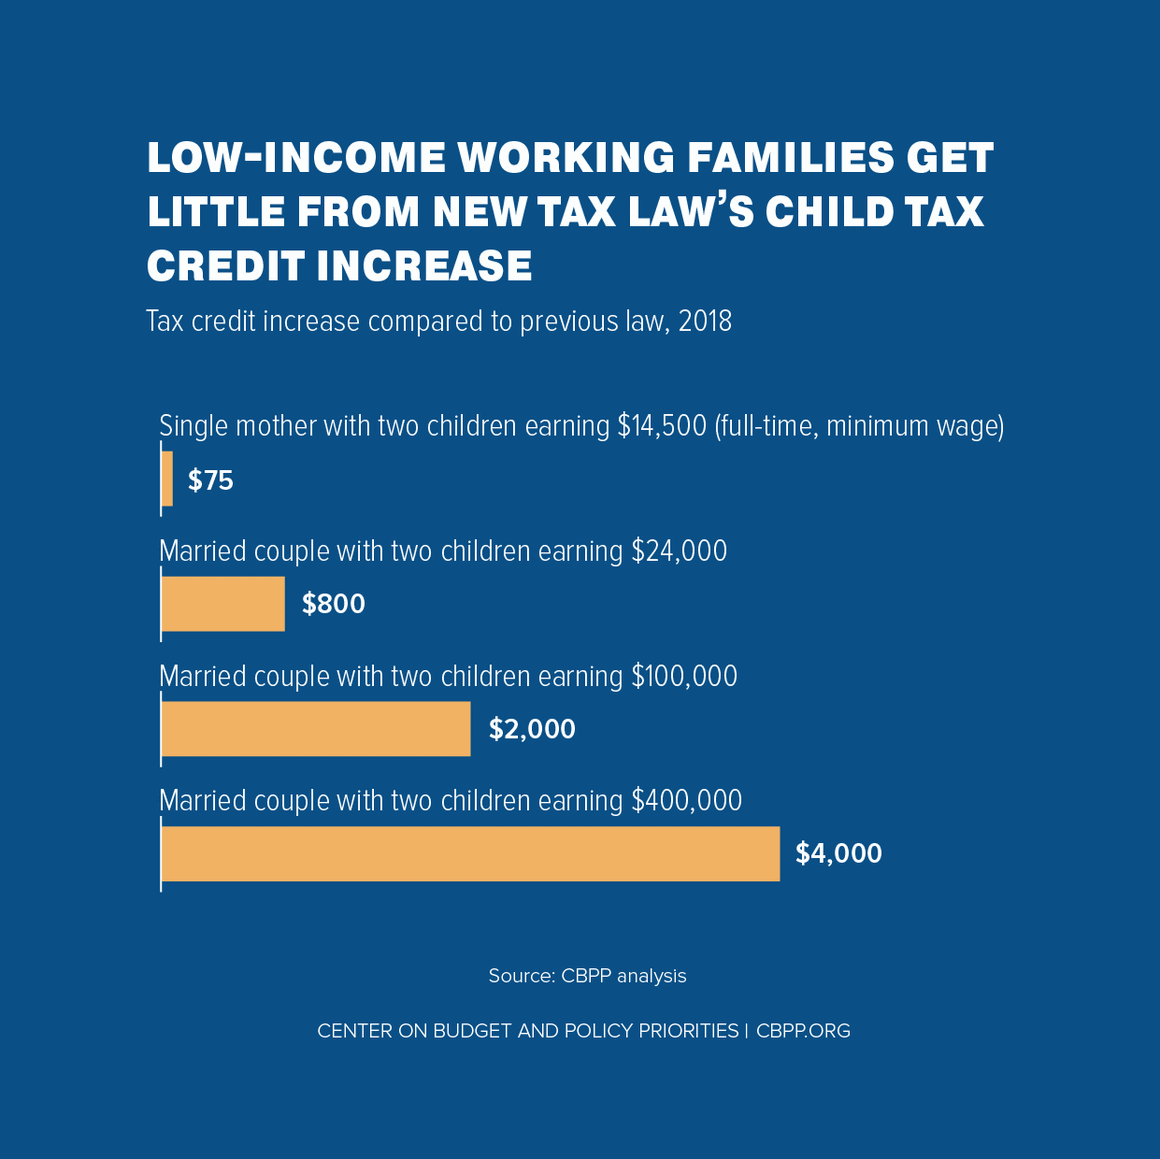 Low-Income Working Families Get Little From New Tax Law's Child Tax Credit Increase